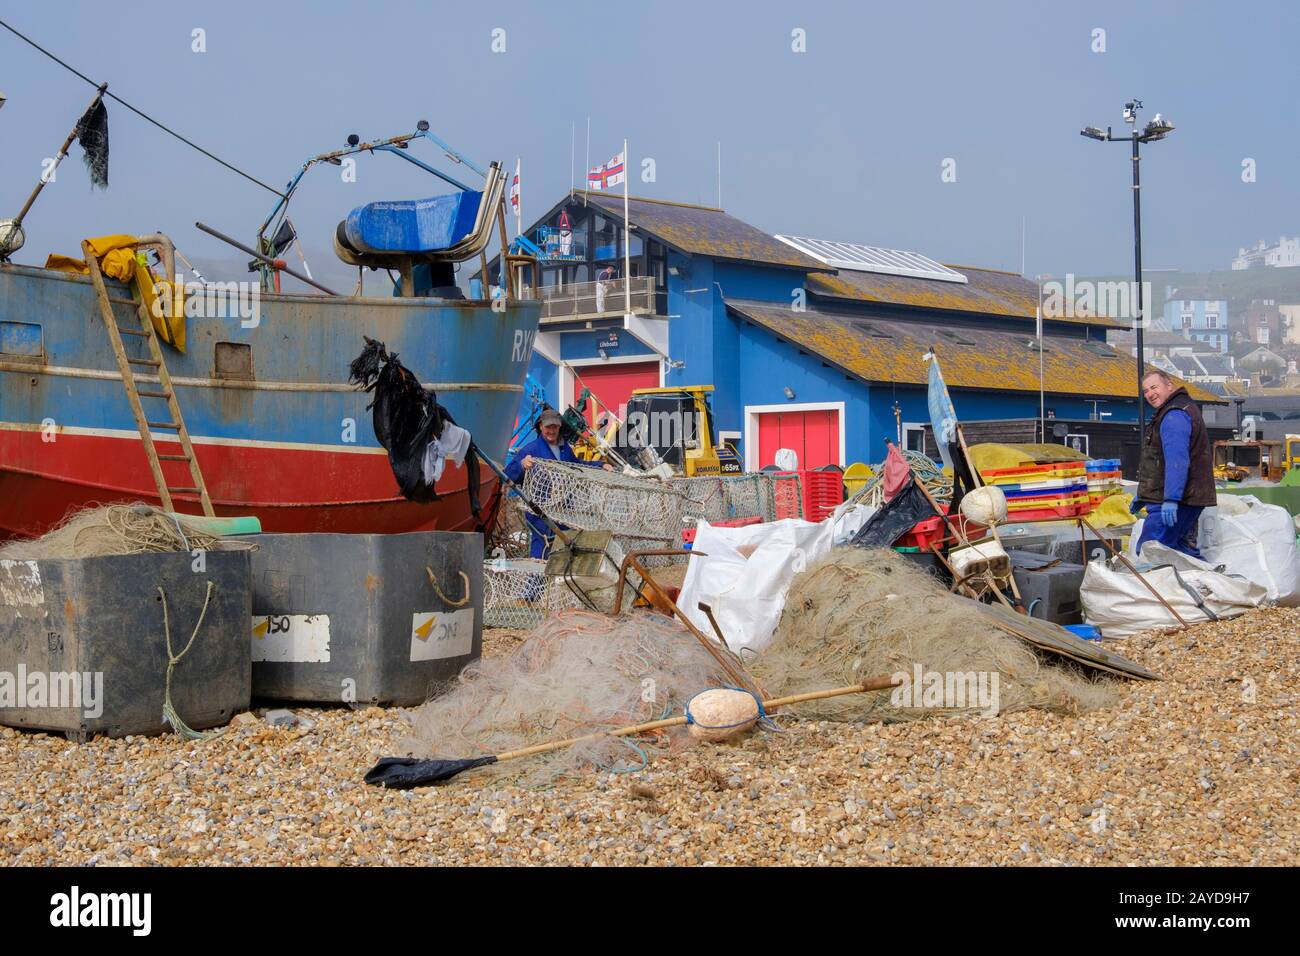 Fishermen and fishing boats on the Old Town Stade at Rock-a-Nore, Hastings, East Sussex, UK Stock Photo